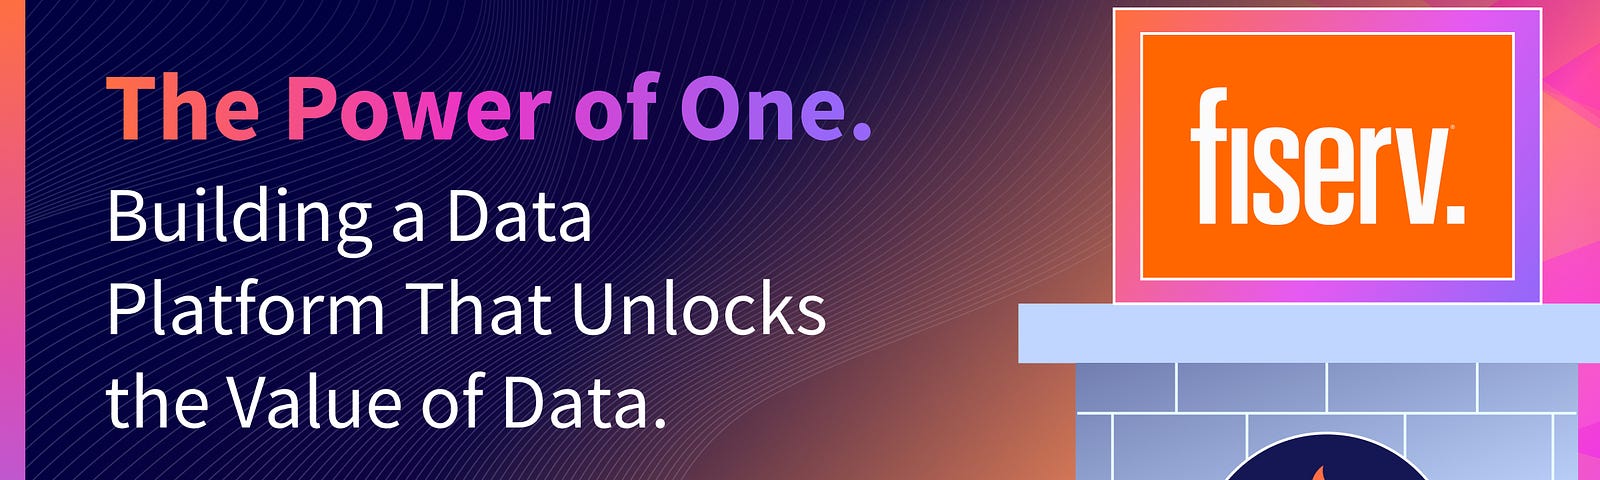 The Power of One. Building a Data Platform That Unlocks the Value of Data Blog Social